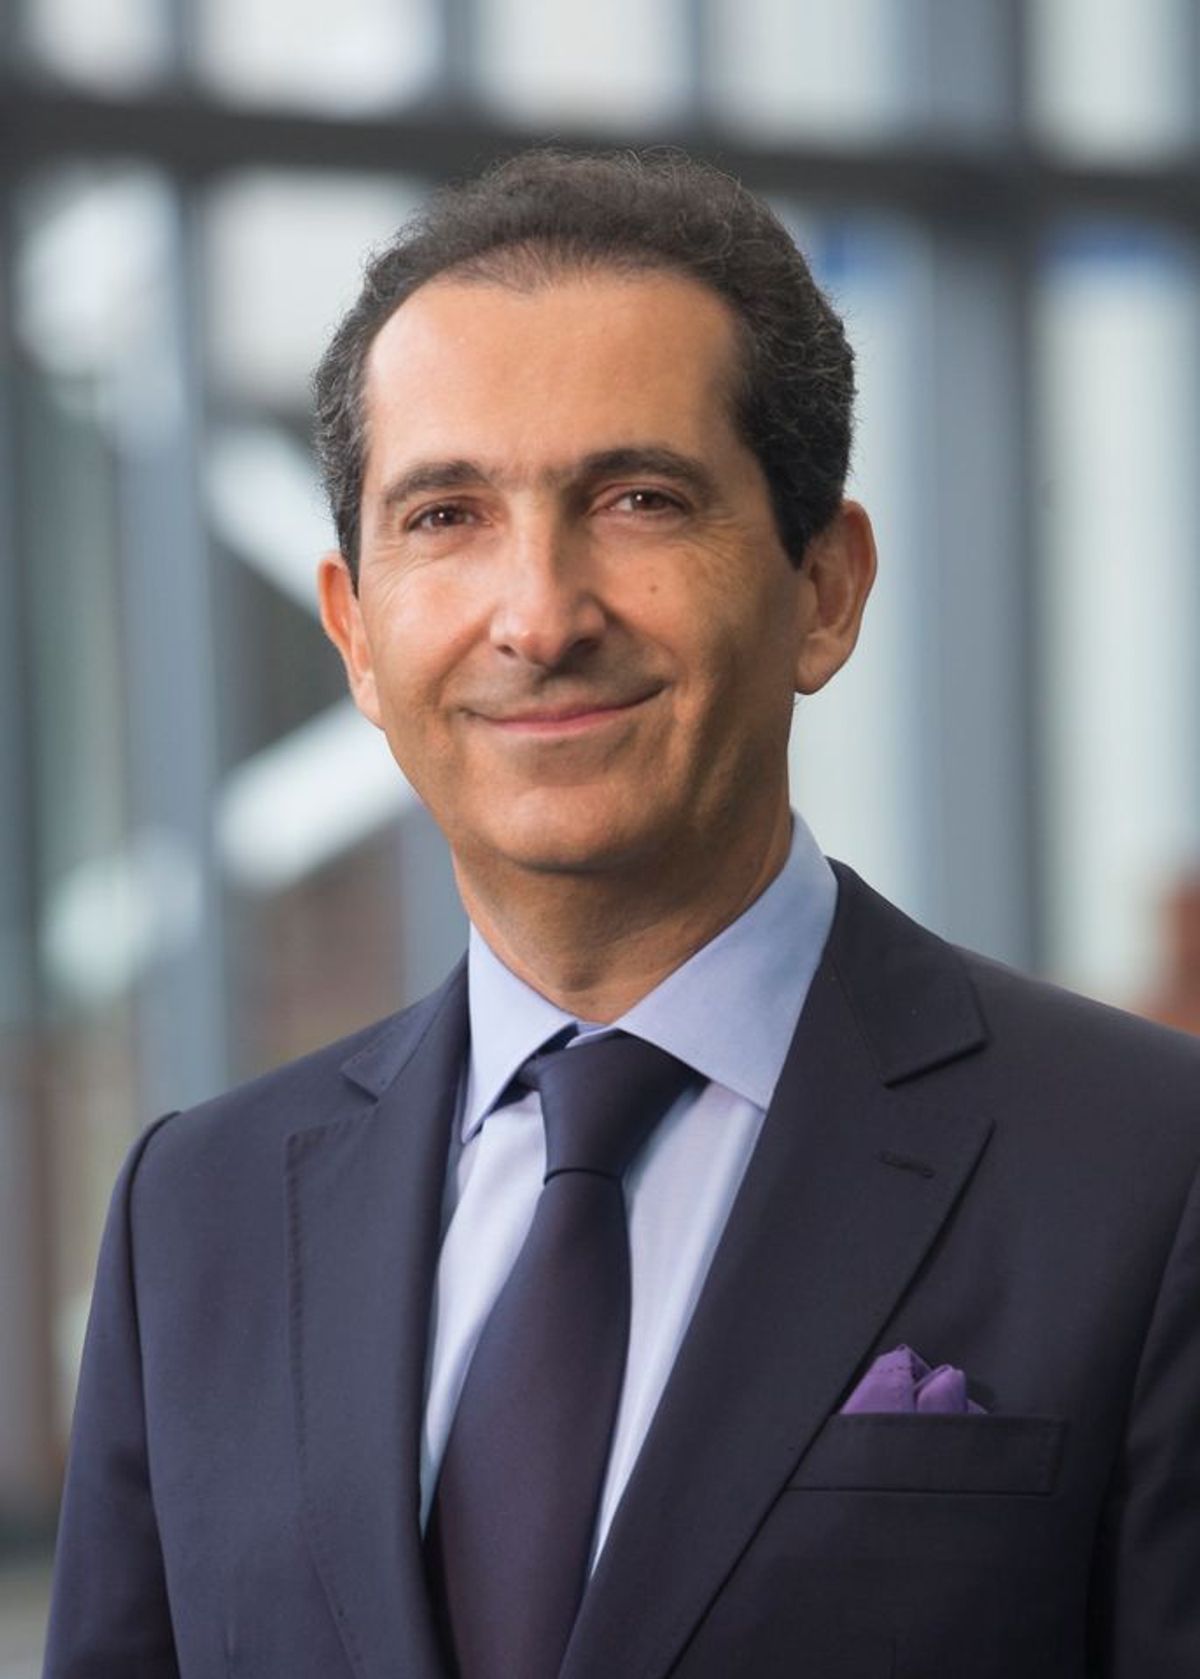 Patrick Drahi is now the sole private owner of Sotheby's, which ceased trading publicly today. Courtesy of Patrick Drahi